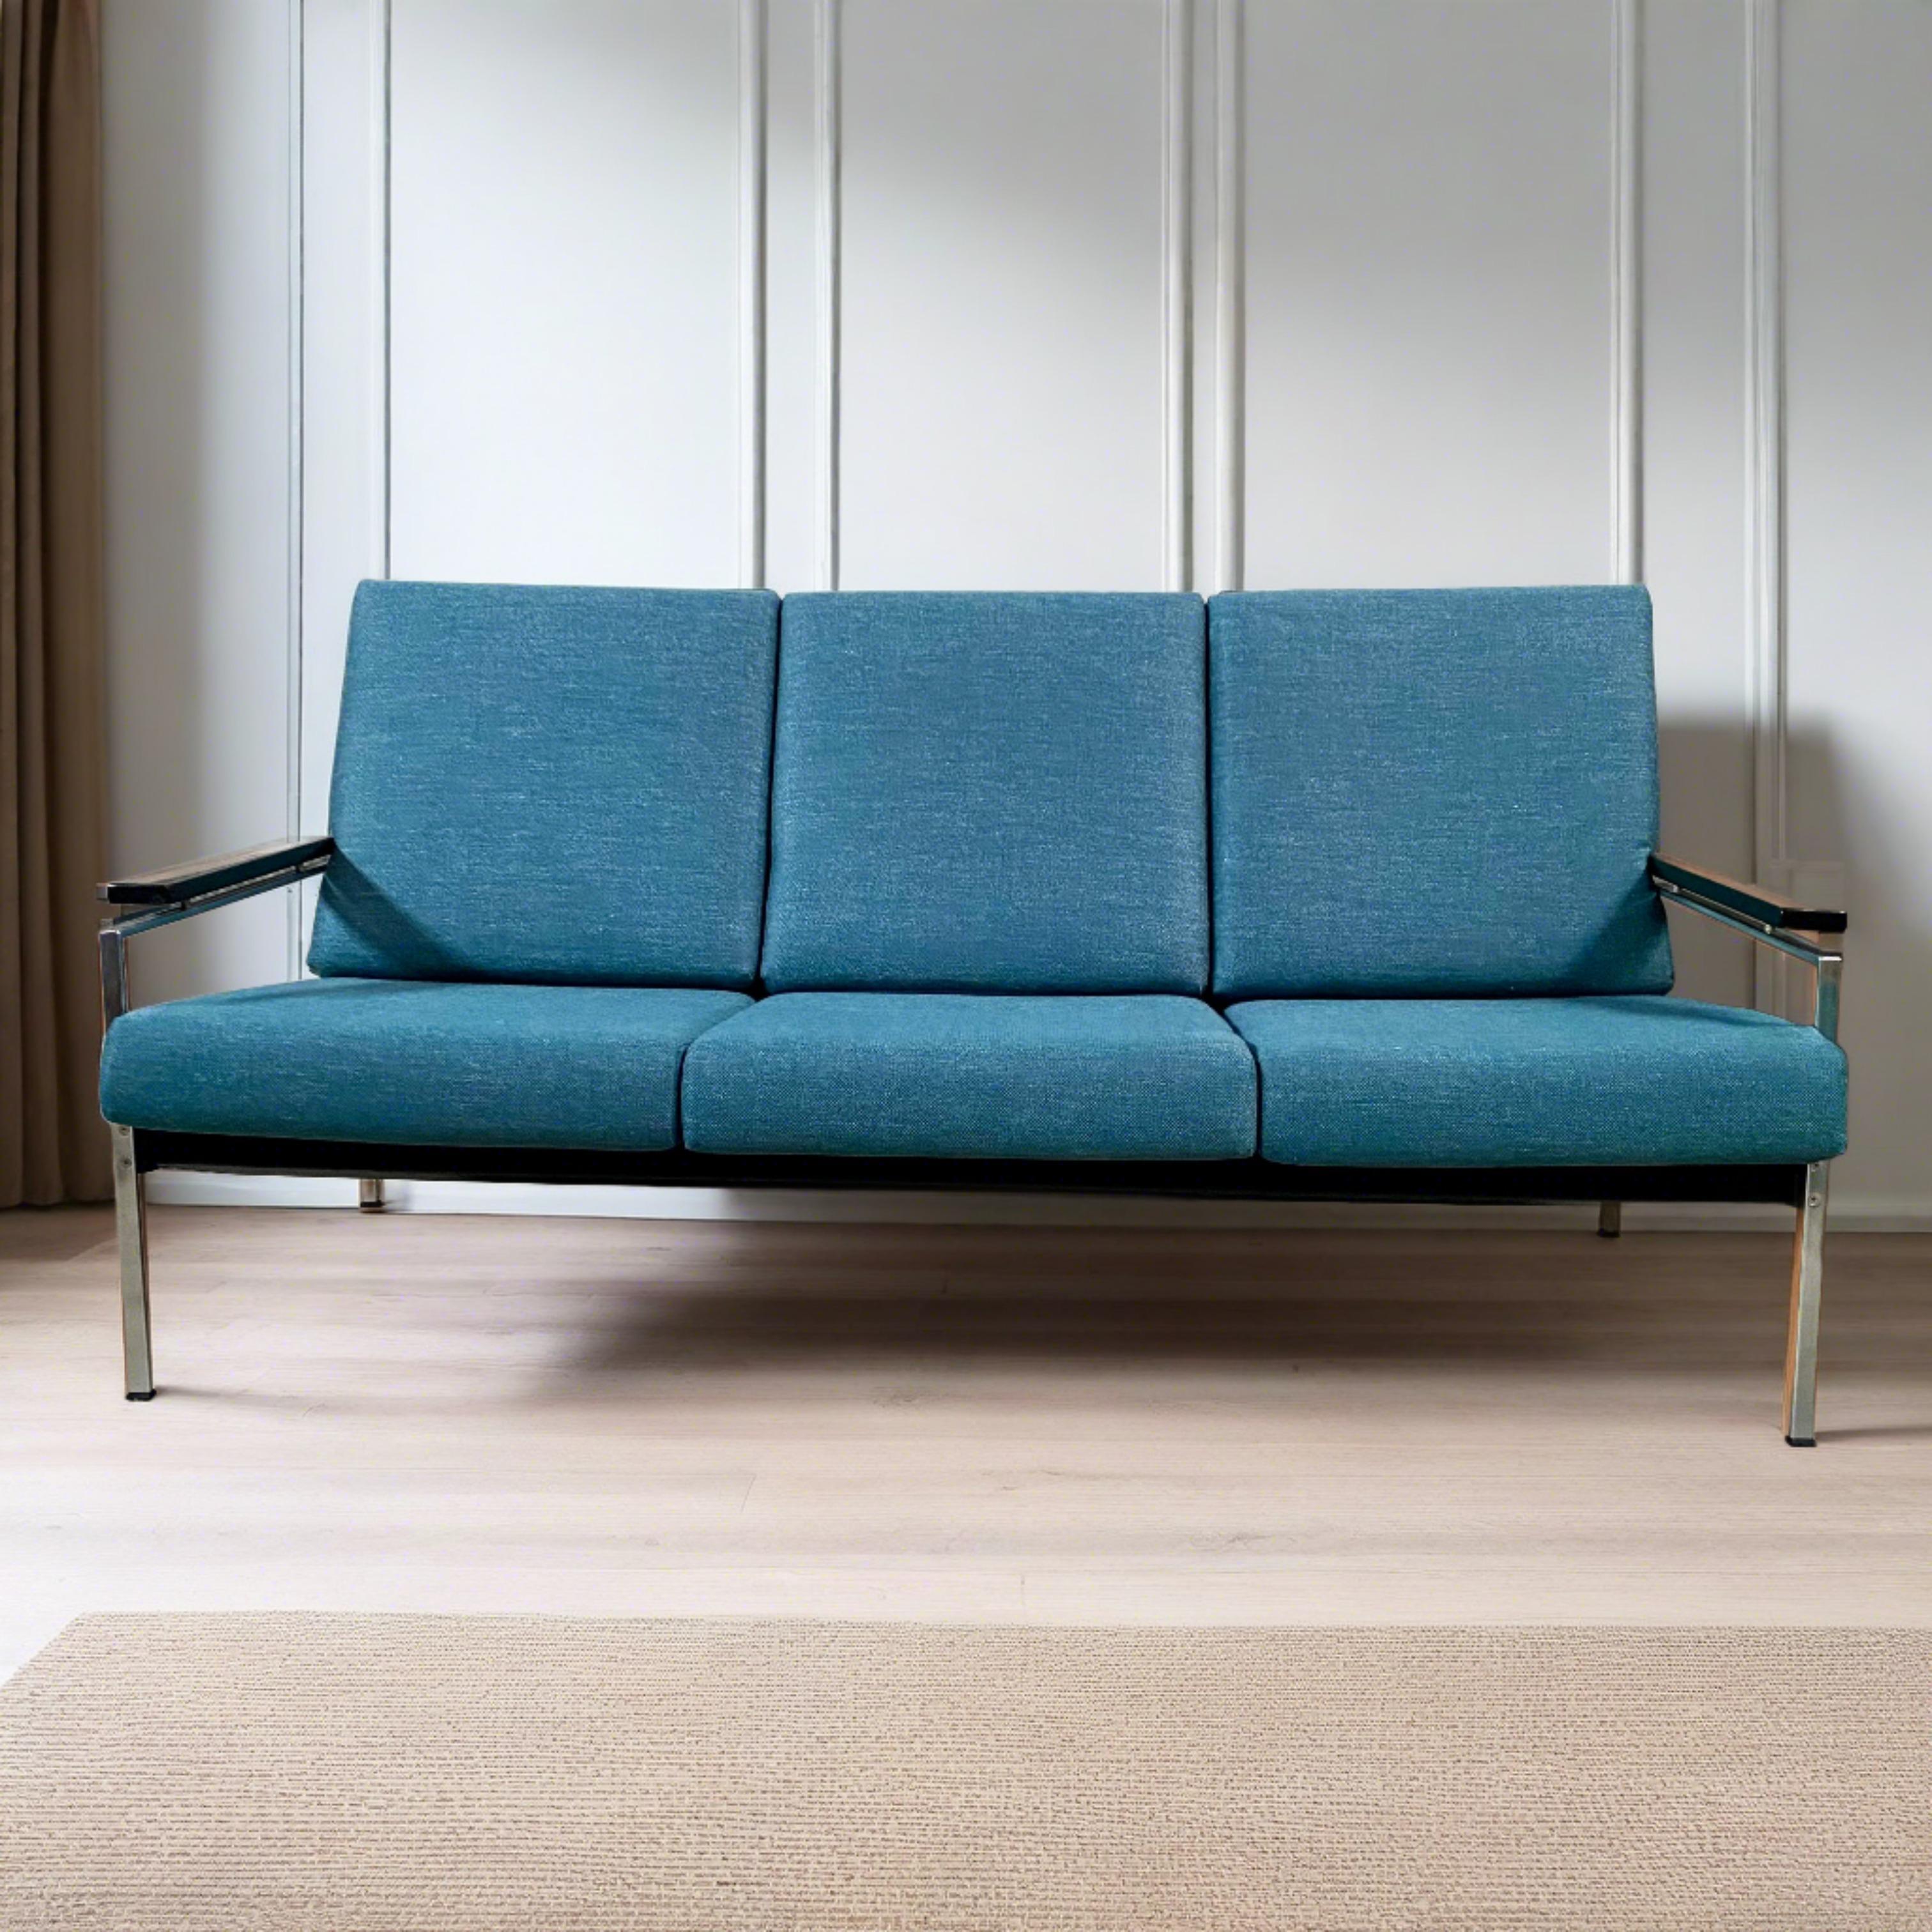 Introducing the Rob Parry Mid-century 3-Seater Sofa by Gelderland: A Timeless Dutch Design Masterpiece

Elevate your living space with the epitome of mid-century sophistication – the Rob Parry 3-Seater Sofa by Gelderland. Crafted in the Netherlands